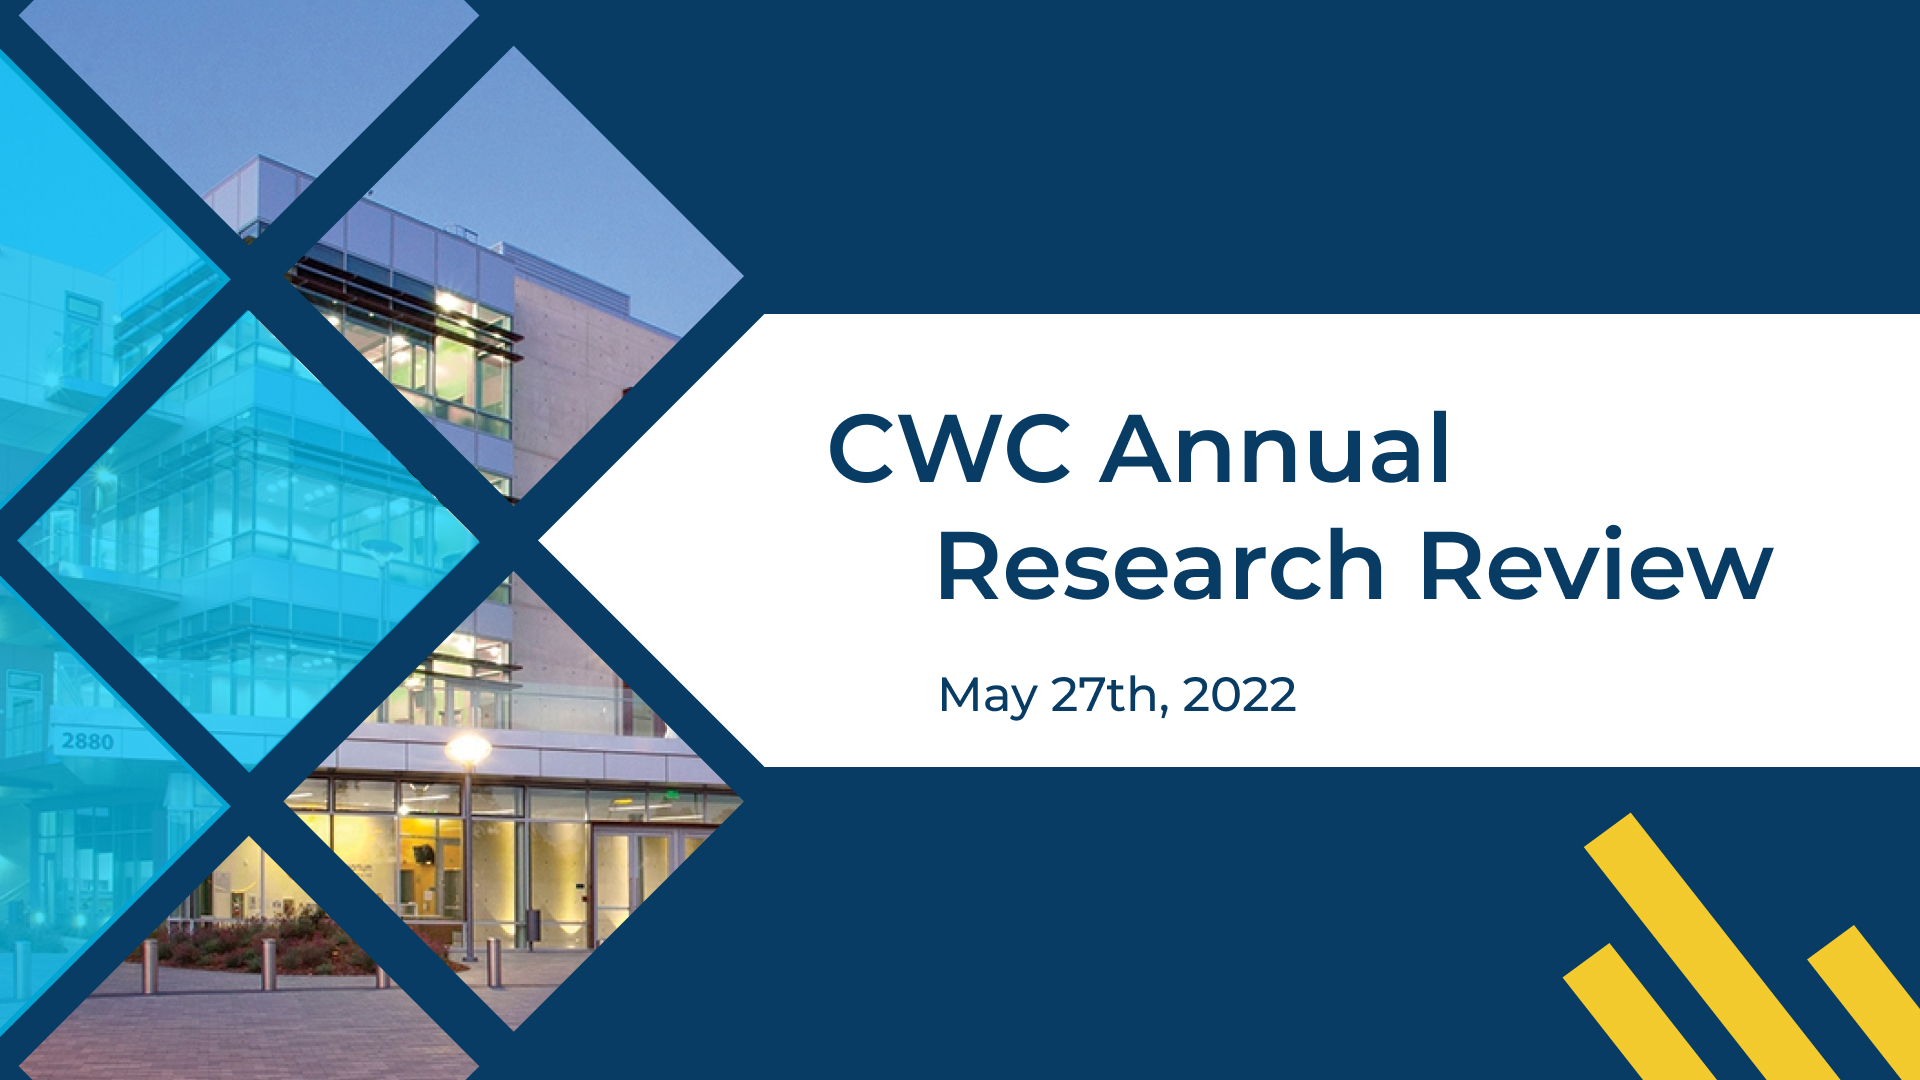 CWC 2022 Research Review